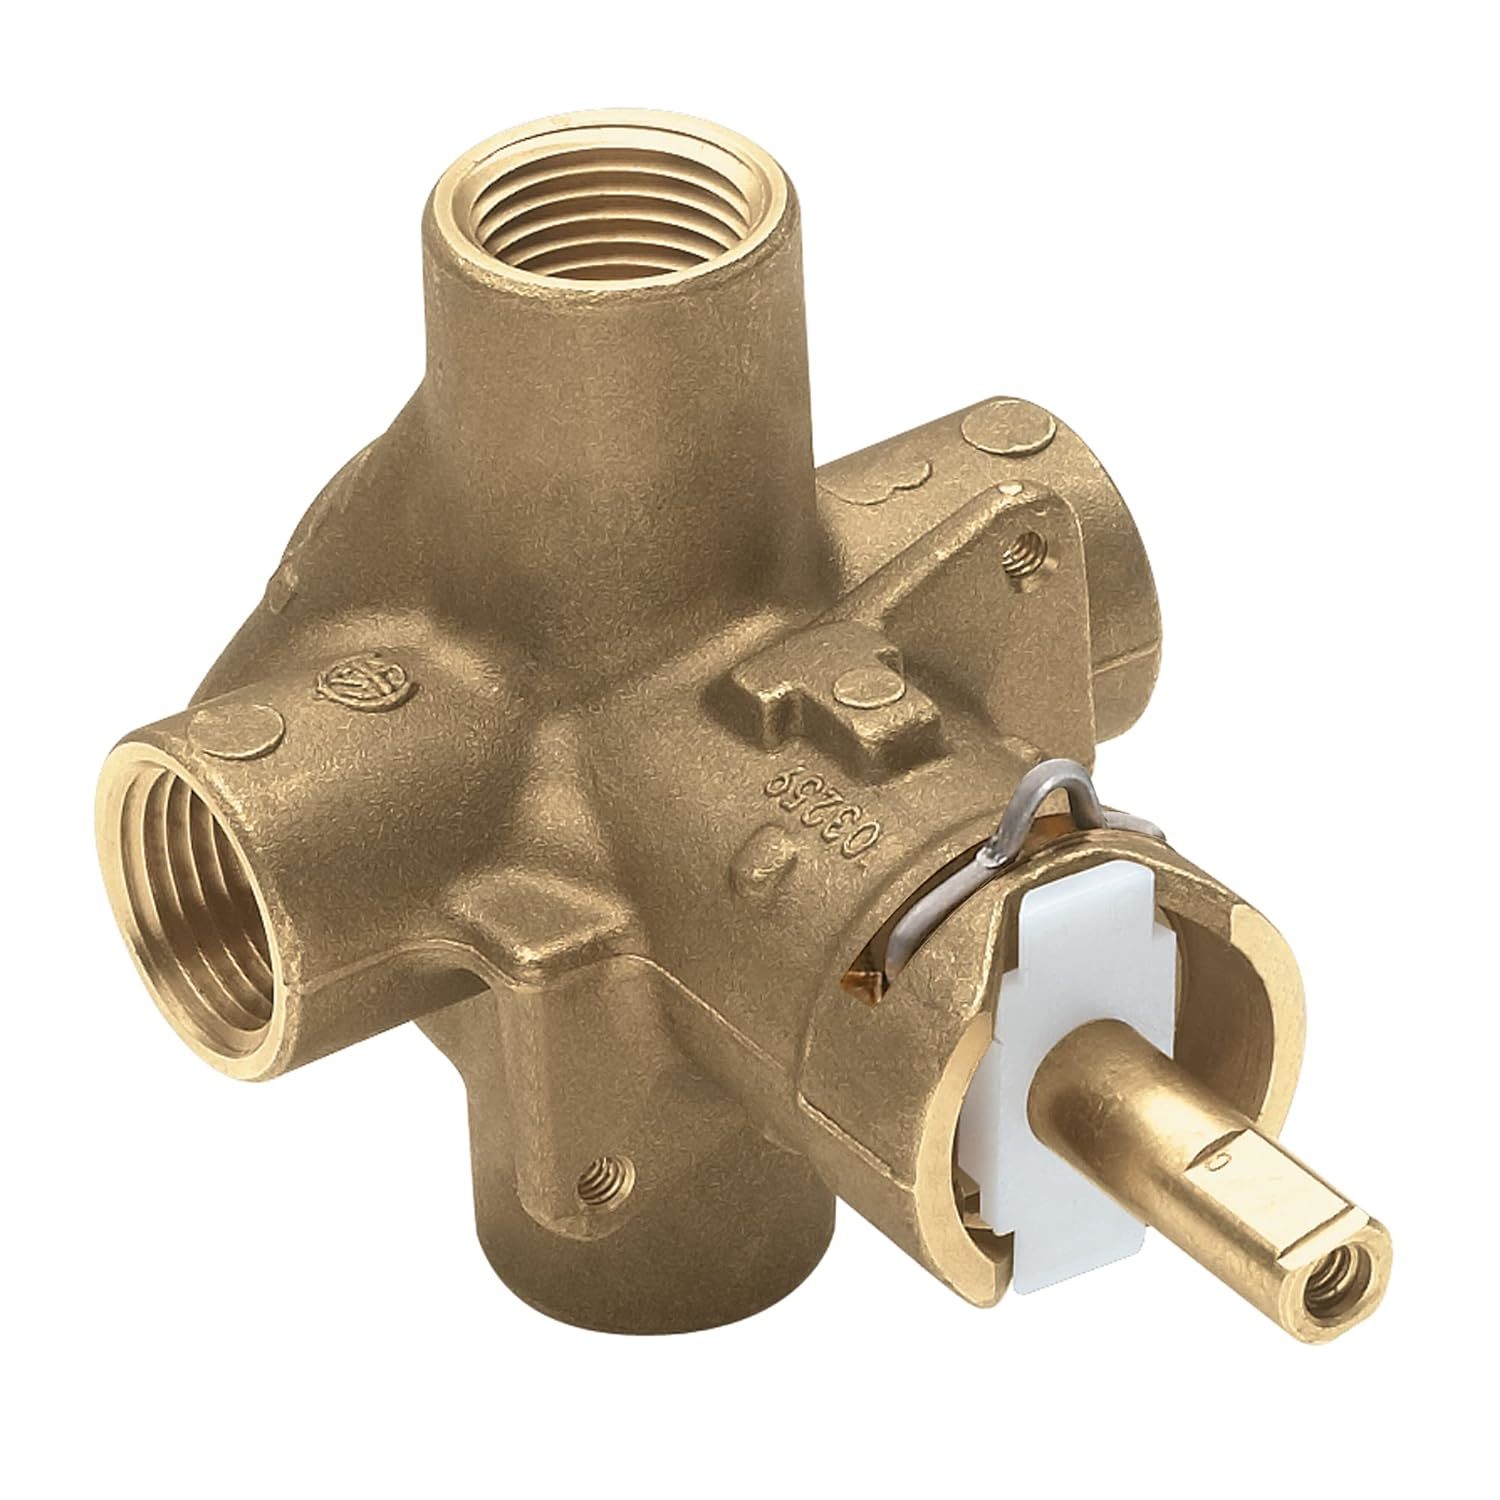 Primary image for Brass Posi-Temp Pressure Balancing Tub And Shower Valve, Four Port Cycle Valve W